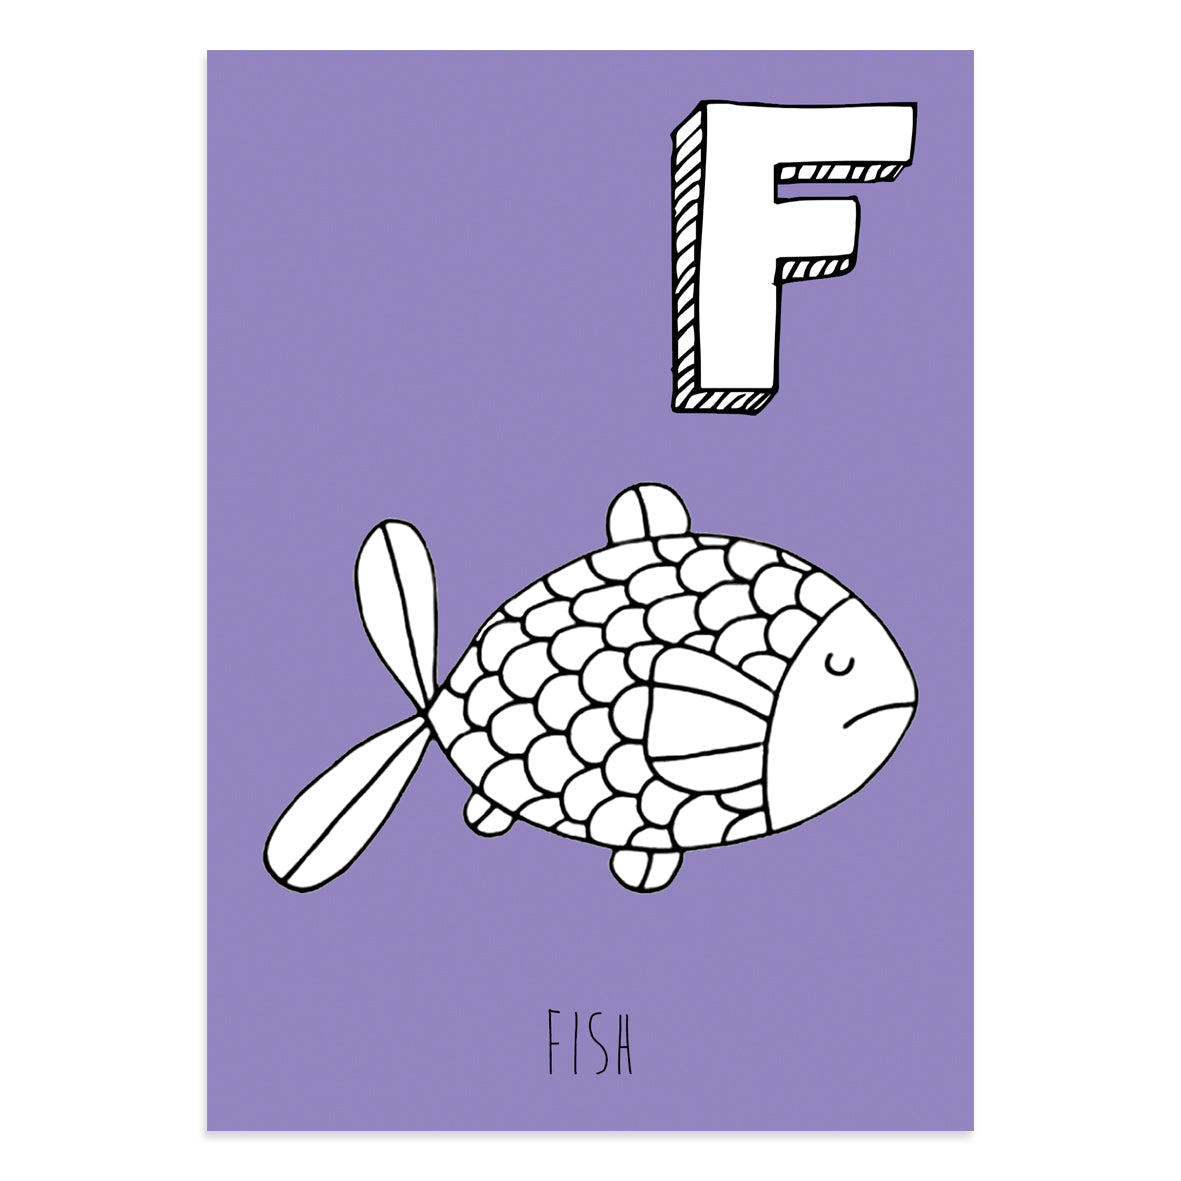 Purple postcard featuring an image of a fish